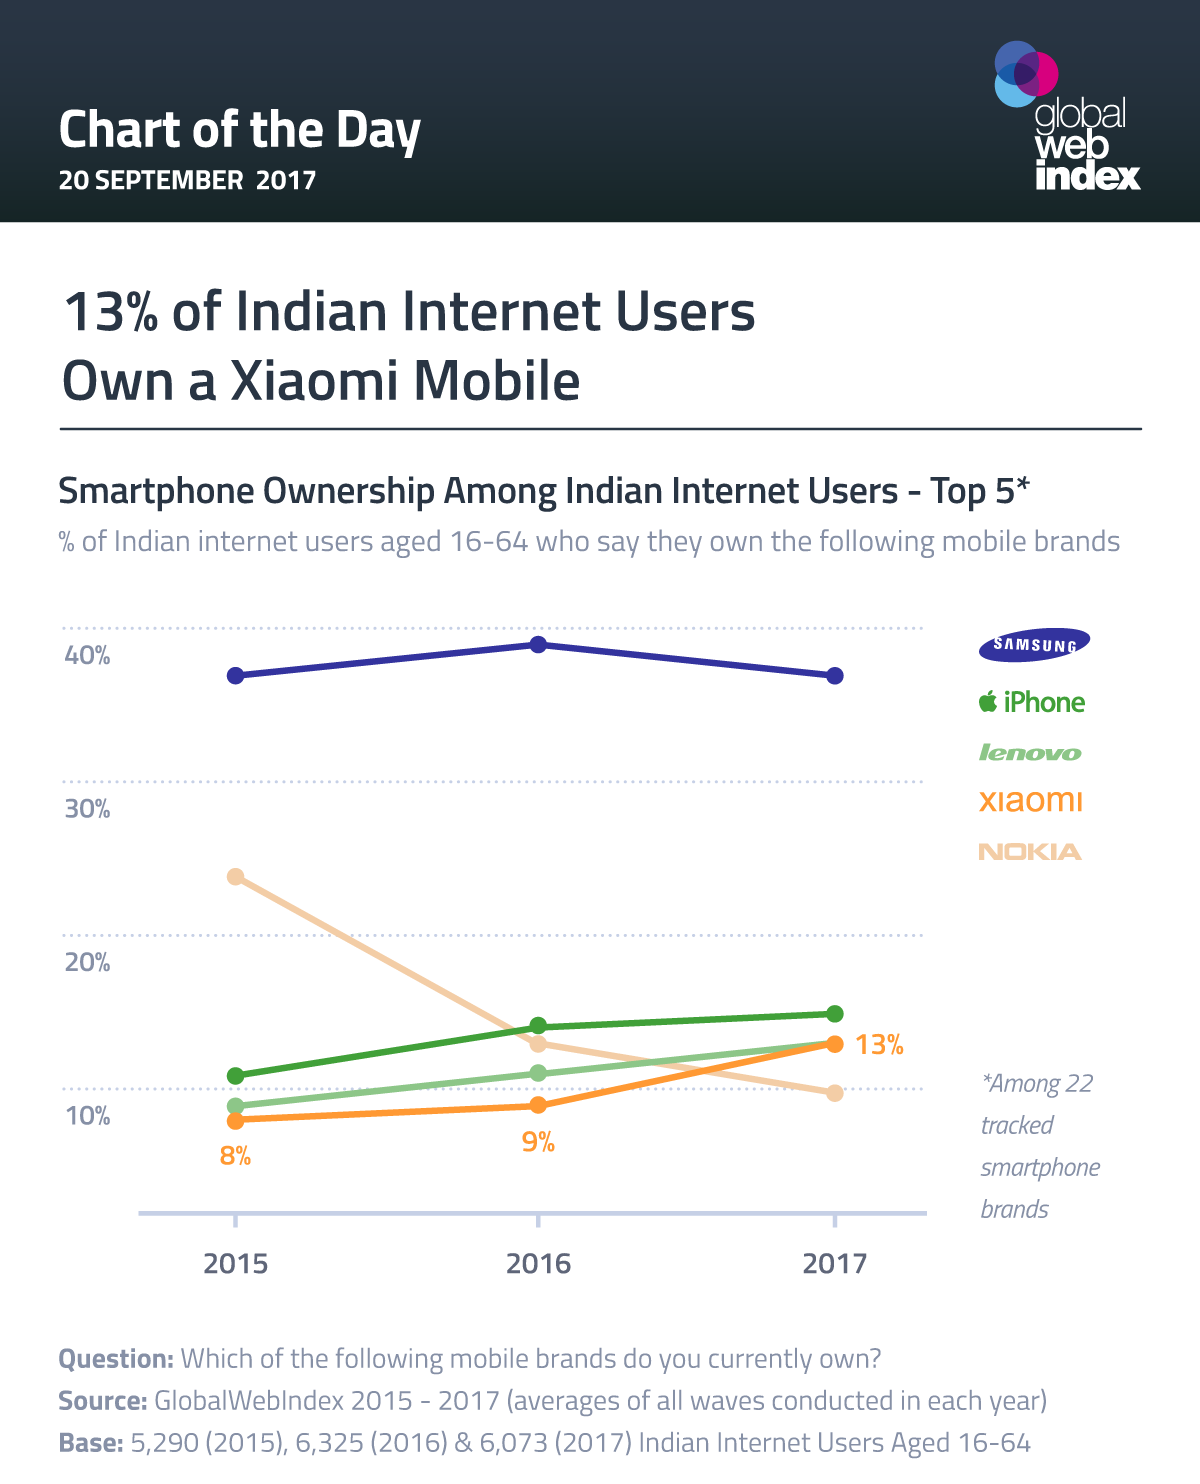 13% of Indian Internet Users Own a Xiaomi Mobile